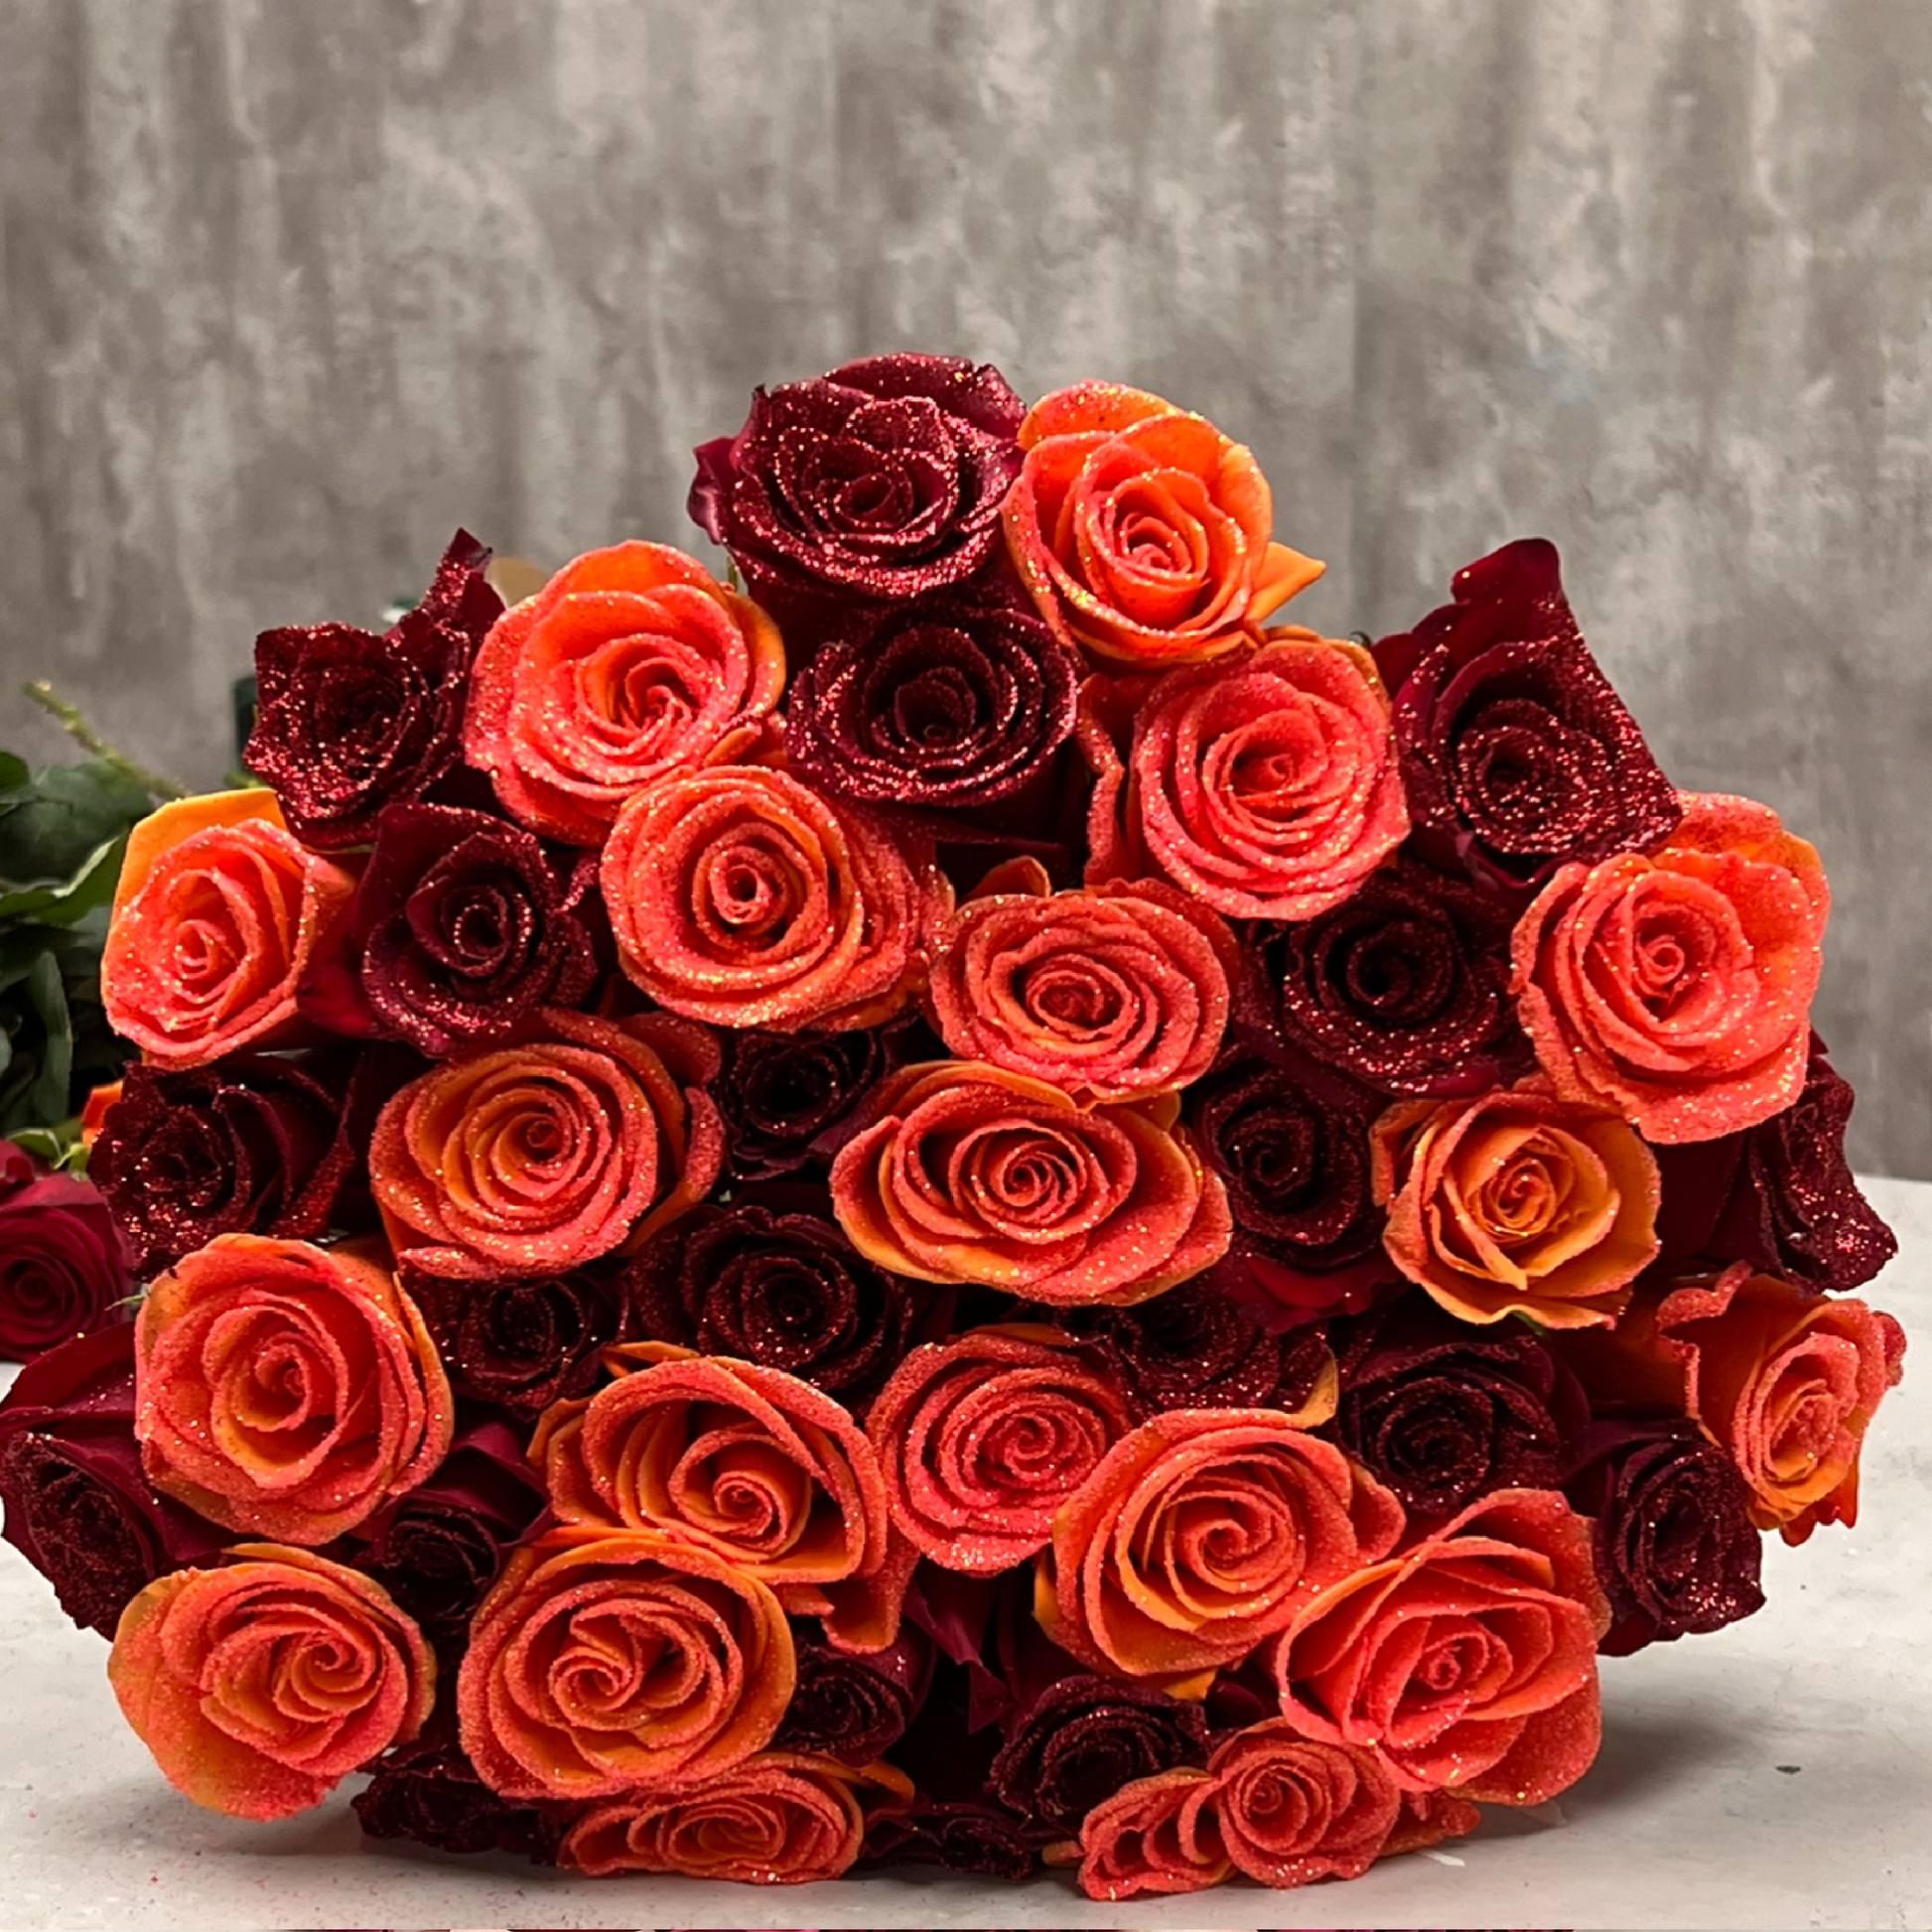 A mesmerizing bouquet named 'Heart on Fire,' featuring a captivating combination of long-stem red and orange roses. Perfect for Valentine's Day, this unique arrangement expresses passion and affection. Same-day delivery available in Miami, FL. Best quality guaranteed for a truly memorable celebration.